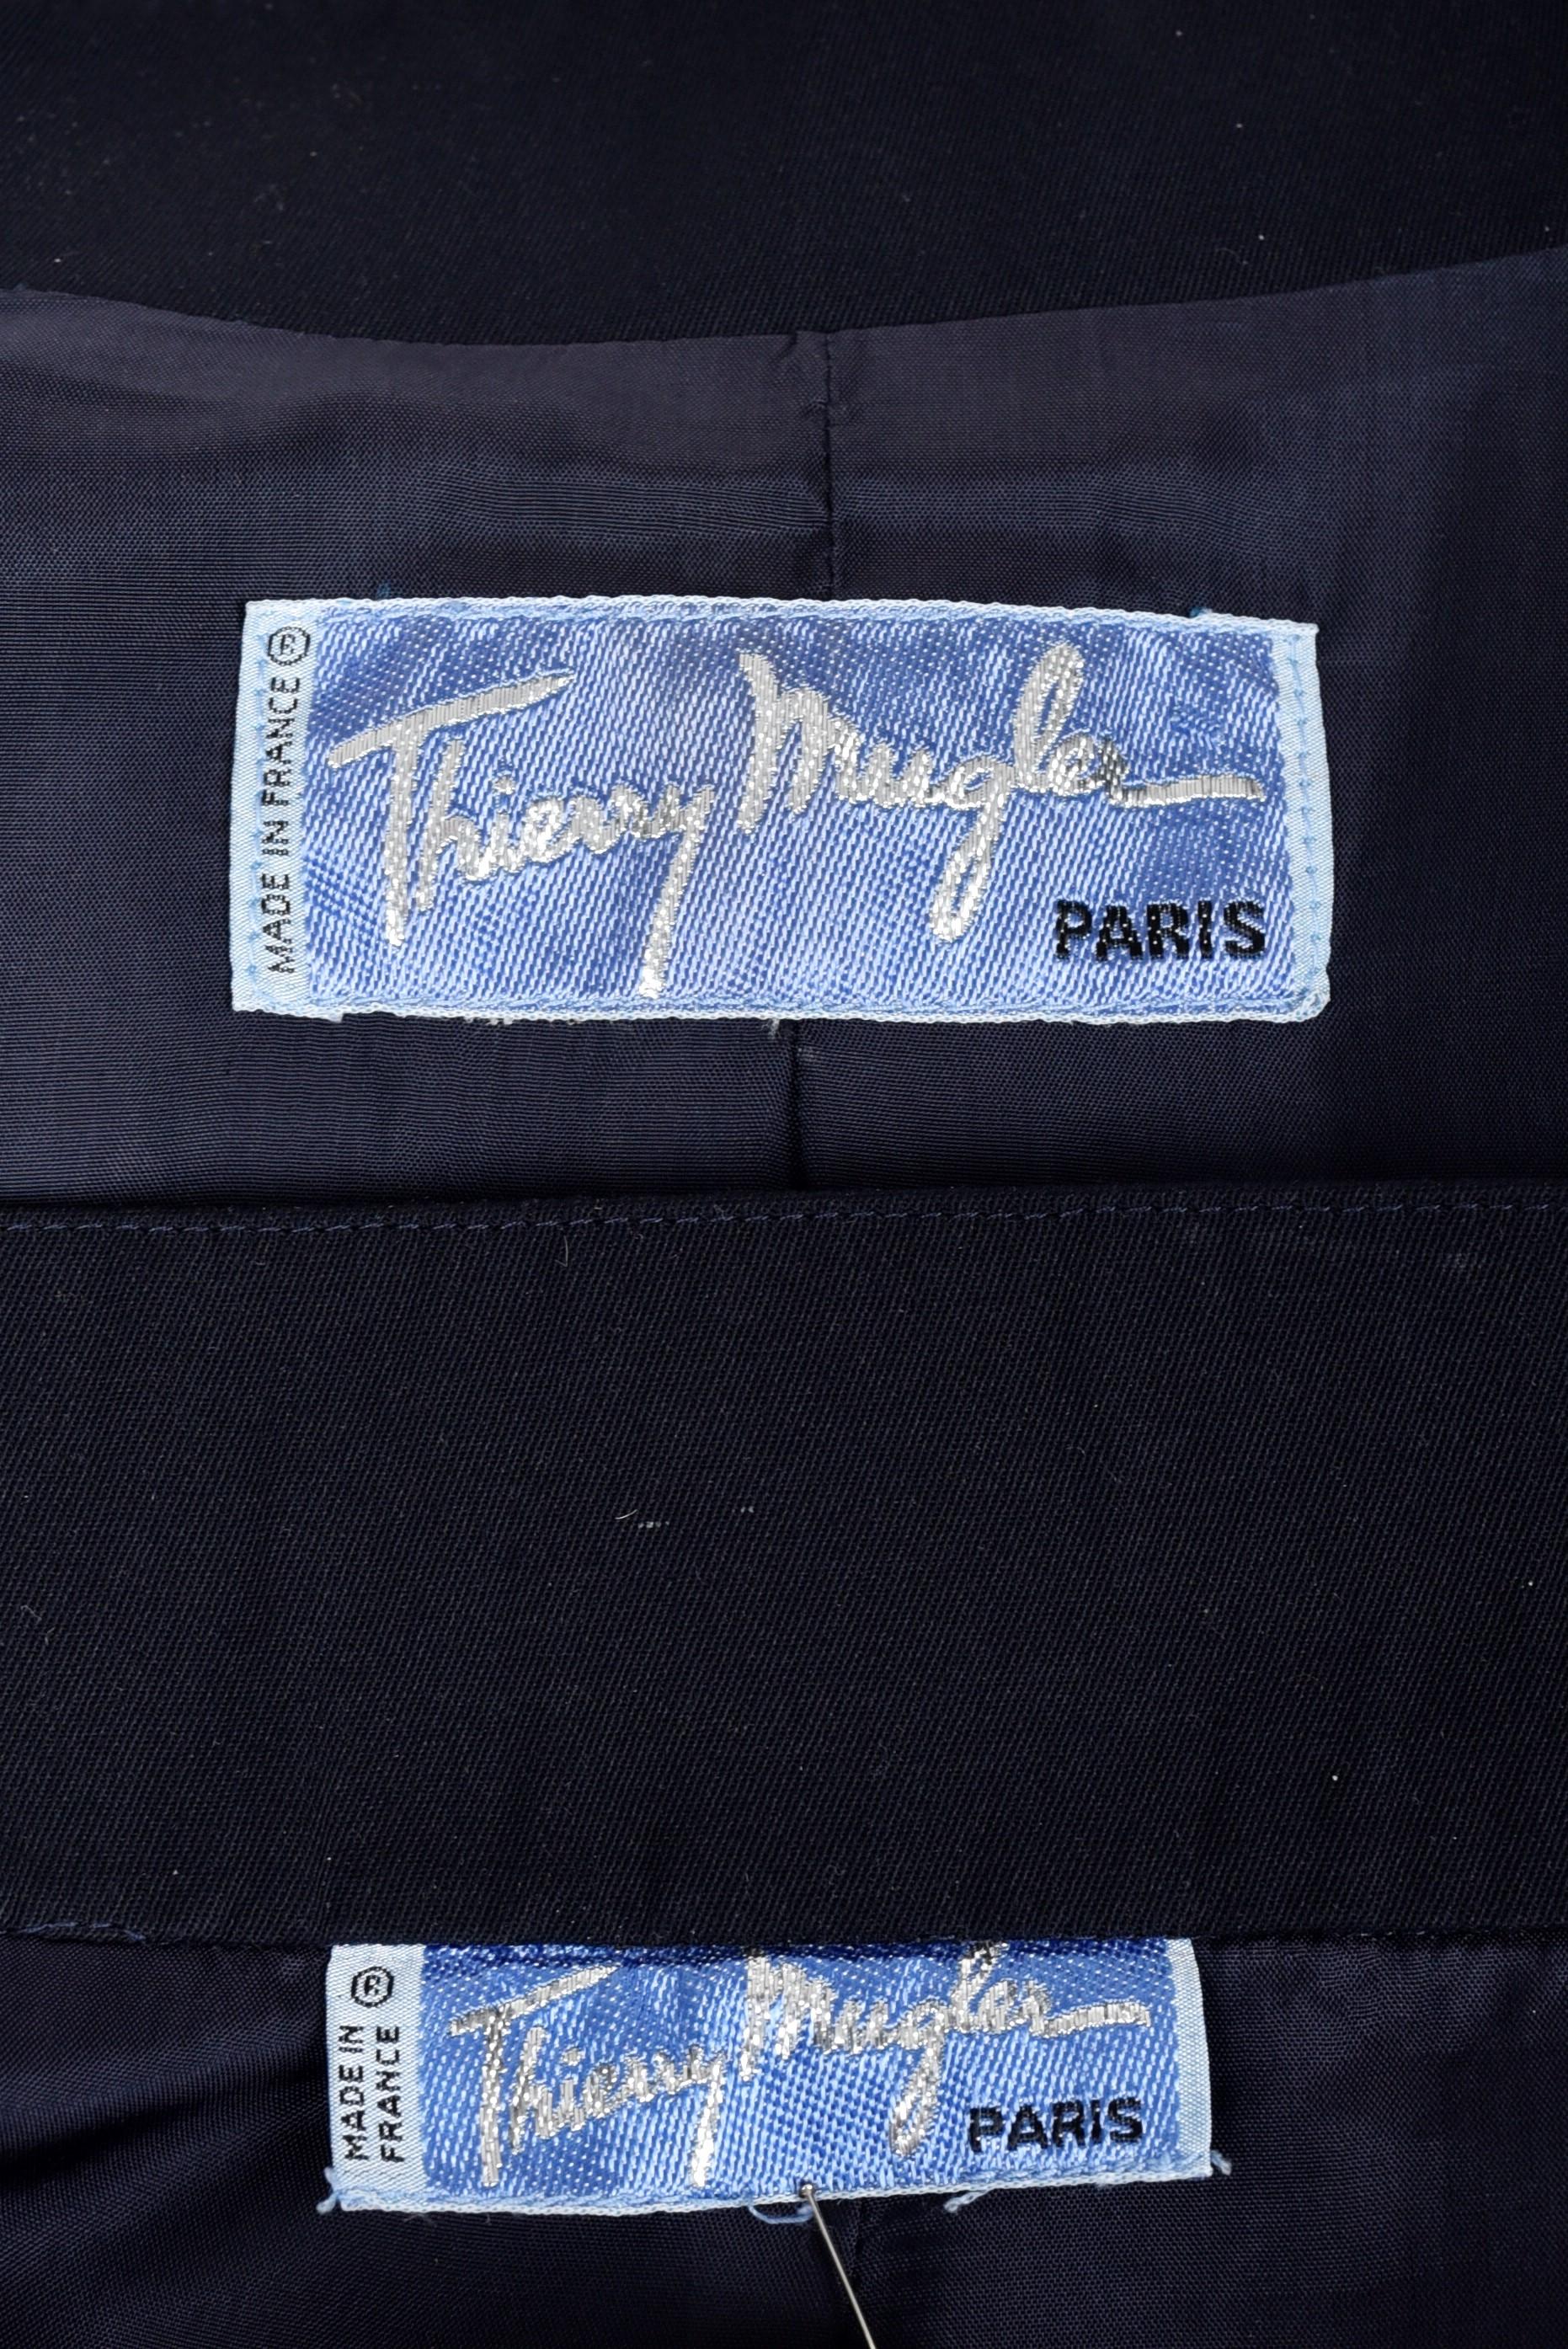 A Thierry Mugler Couture Black Tuxedo Skirt Suit - France Circa 1990/2000 In Good Condition For Sale In Toulon, FR